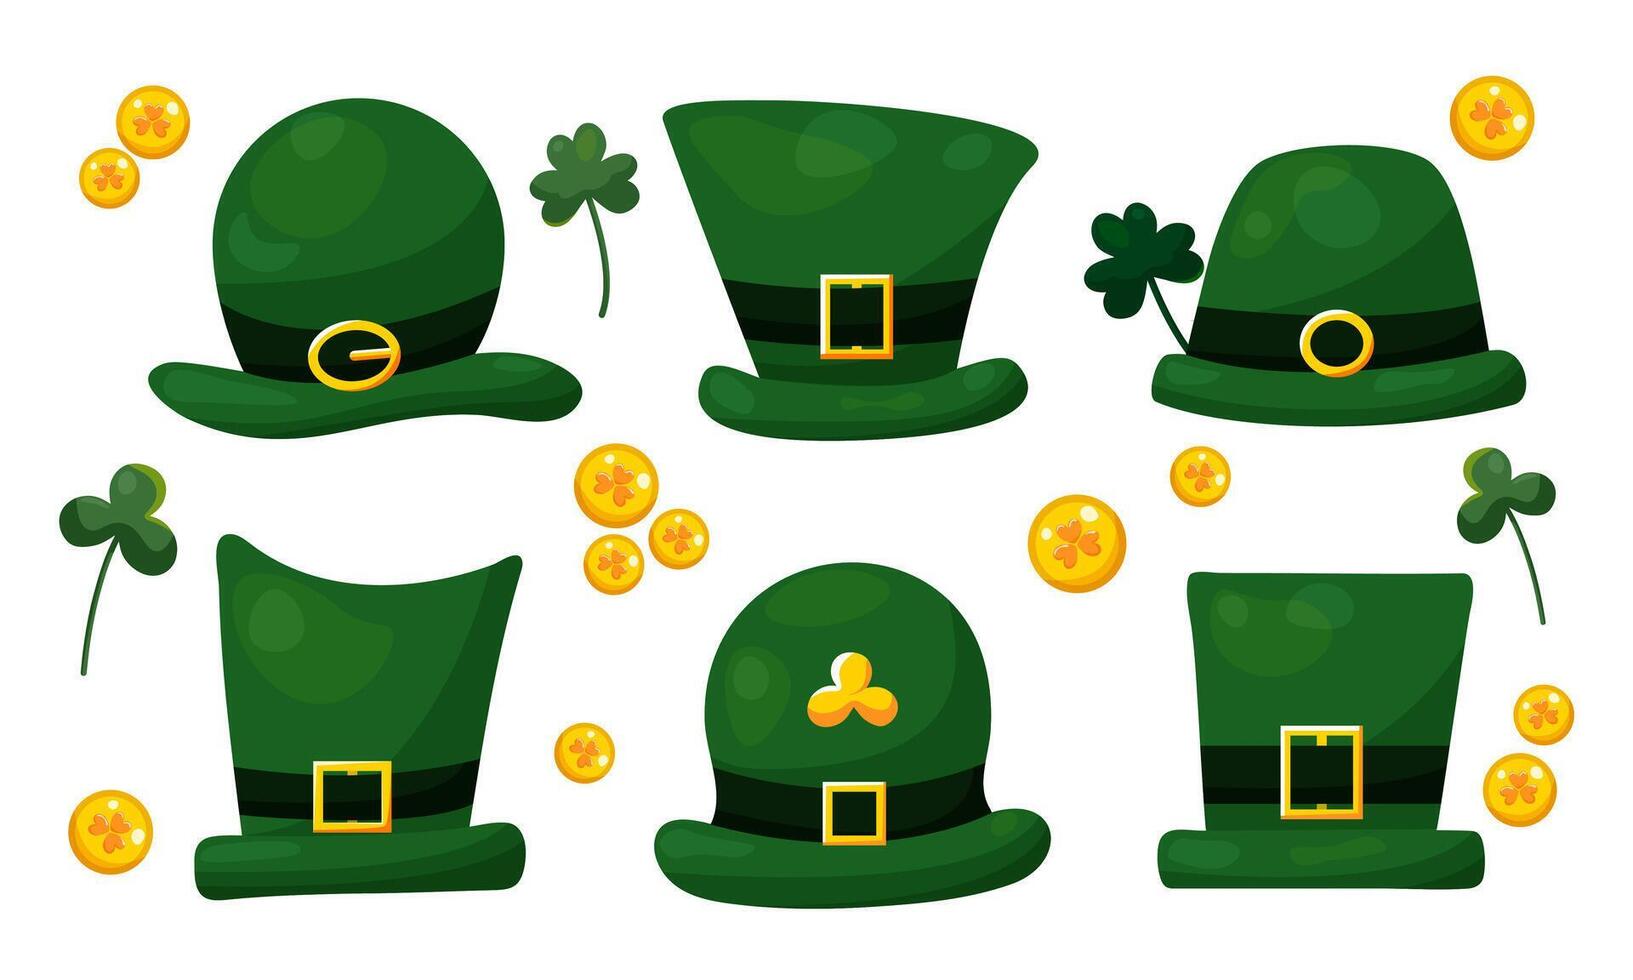 Set of green hats for St. Patrick's Day with gold coins and clover twigs. Isolated elements on white background for postcard, banner, pattern and web designs vector